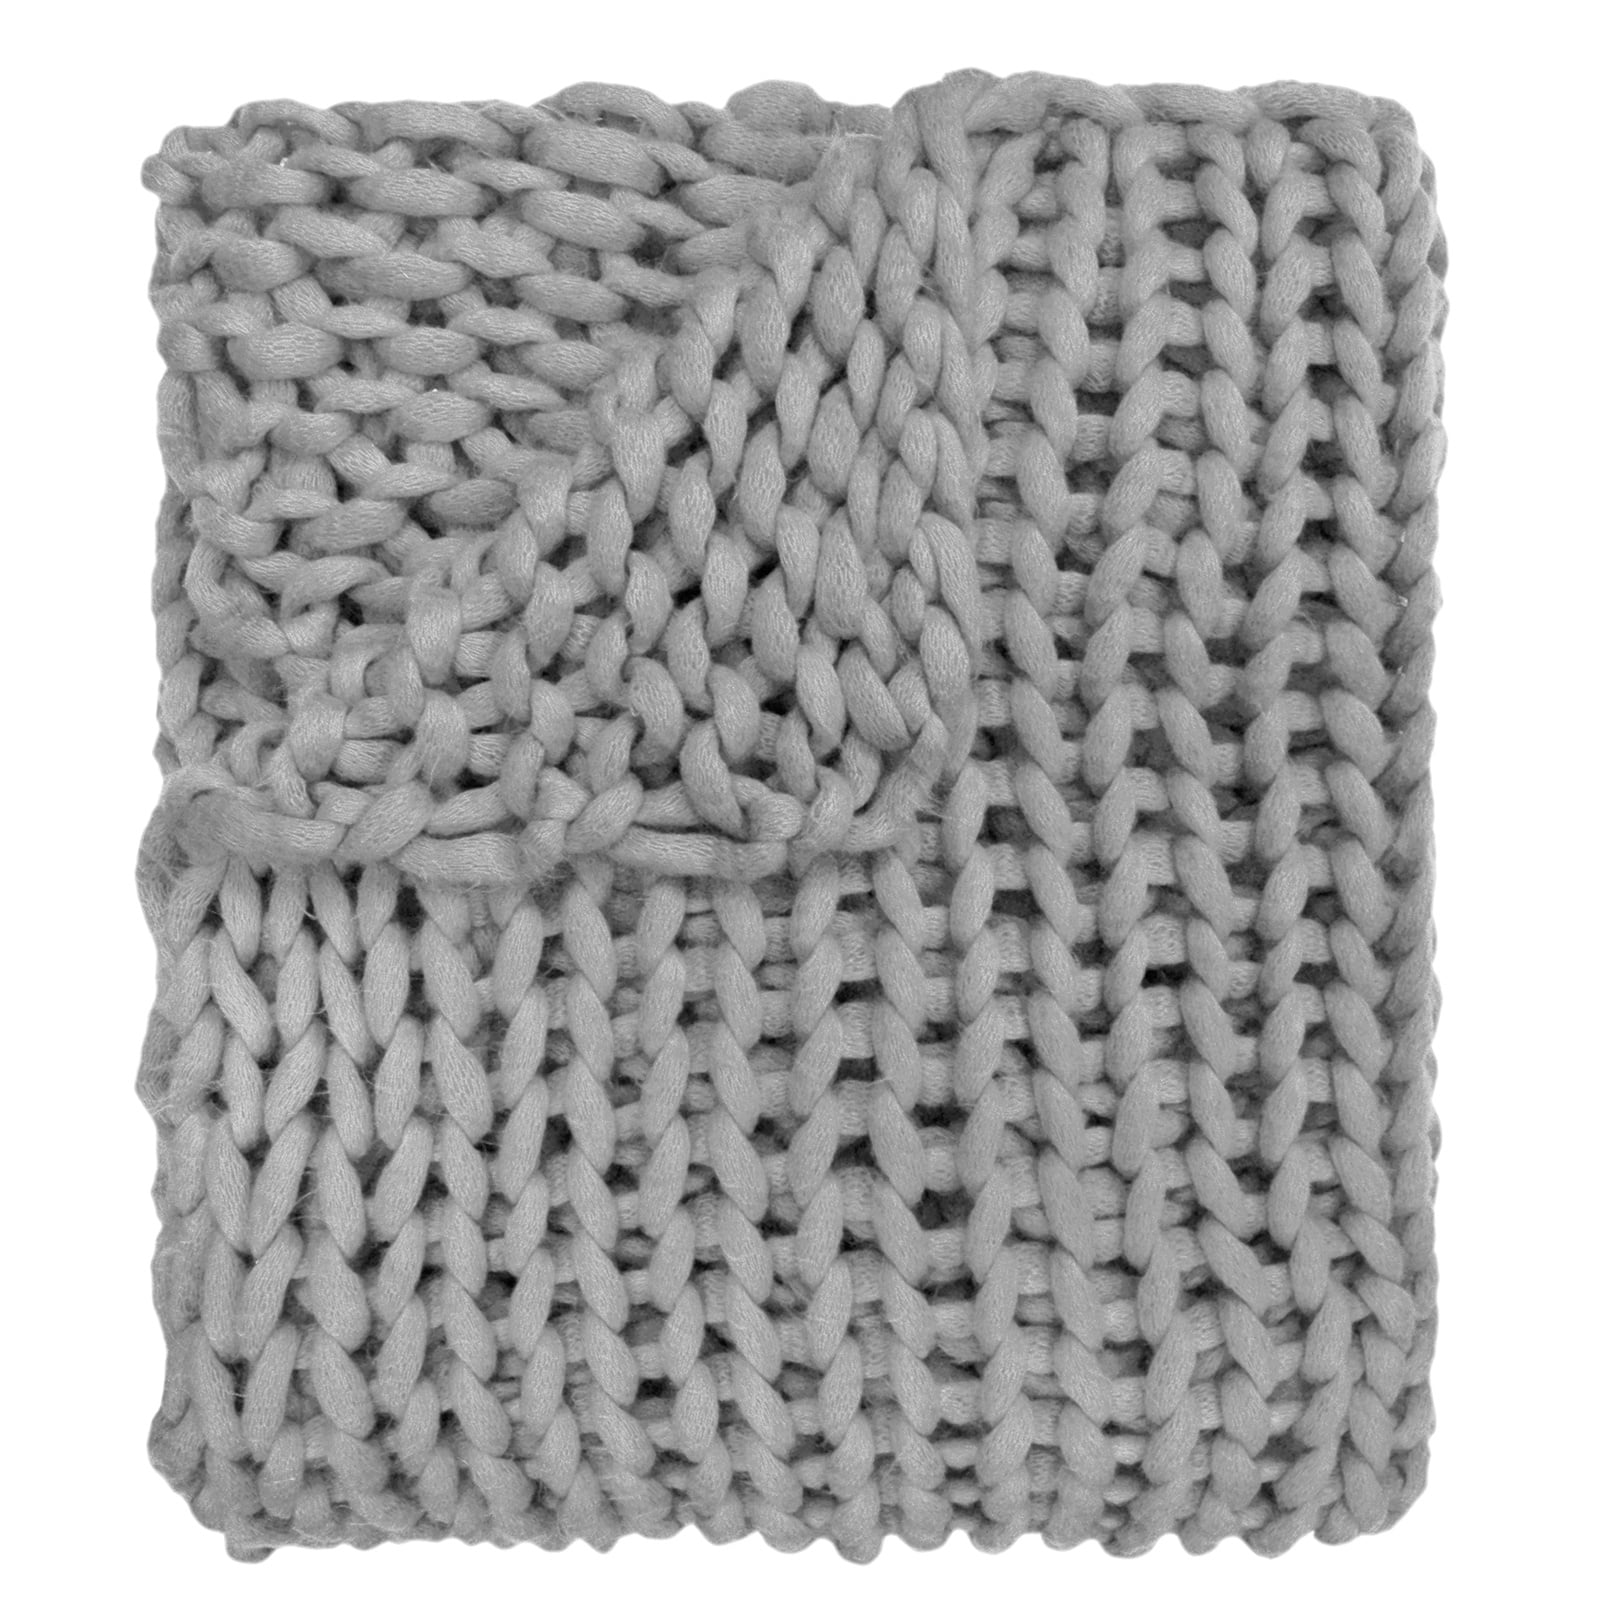 Picture of American Heritage Textiles 70000 40 x 50 in. Chunky Knit Throw, Grey